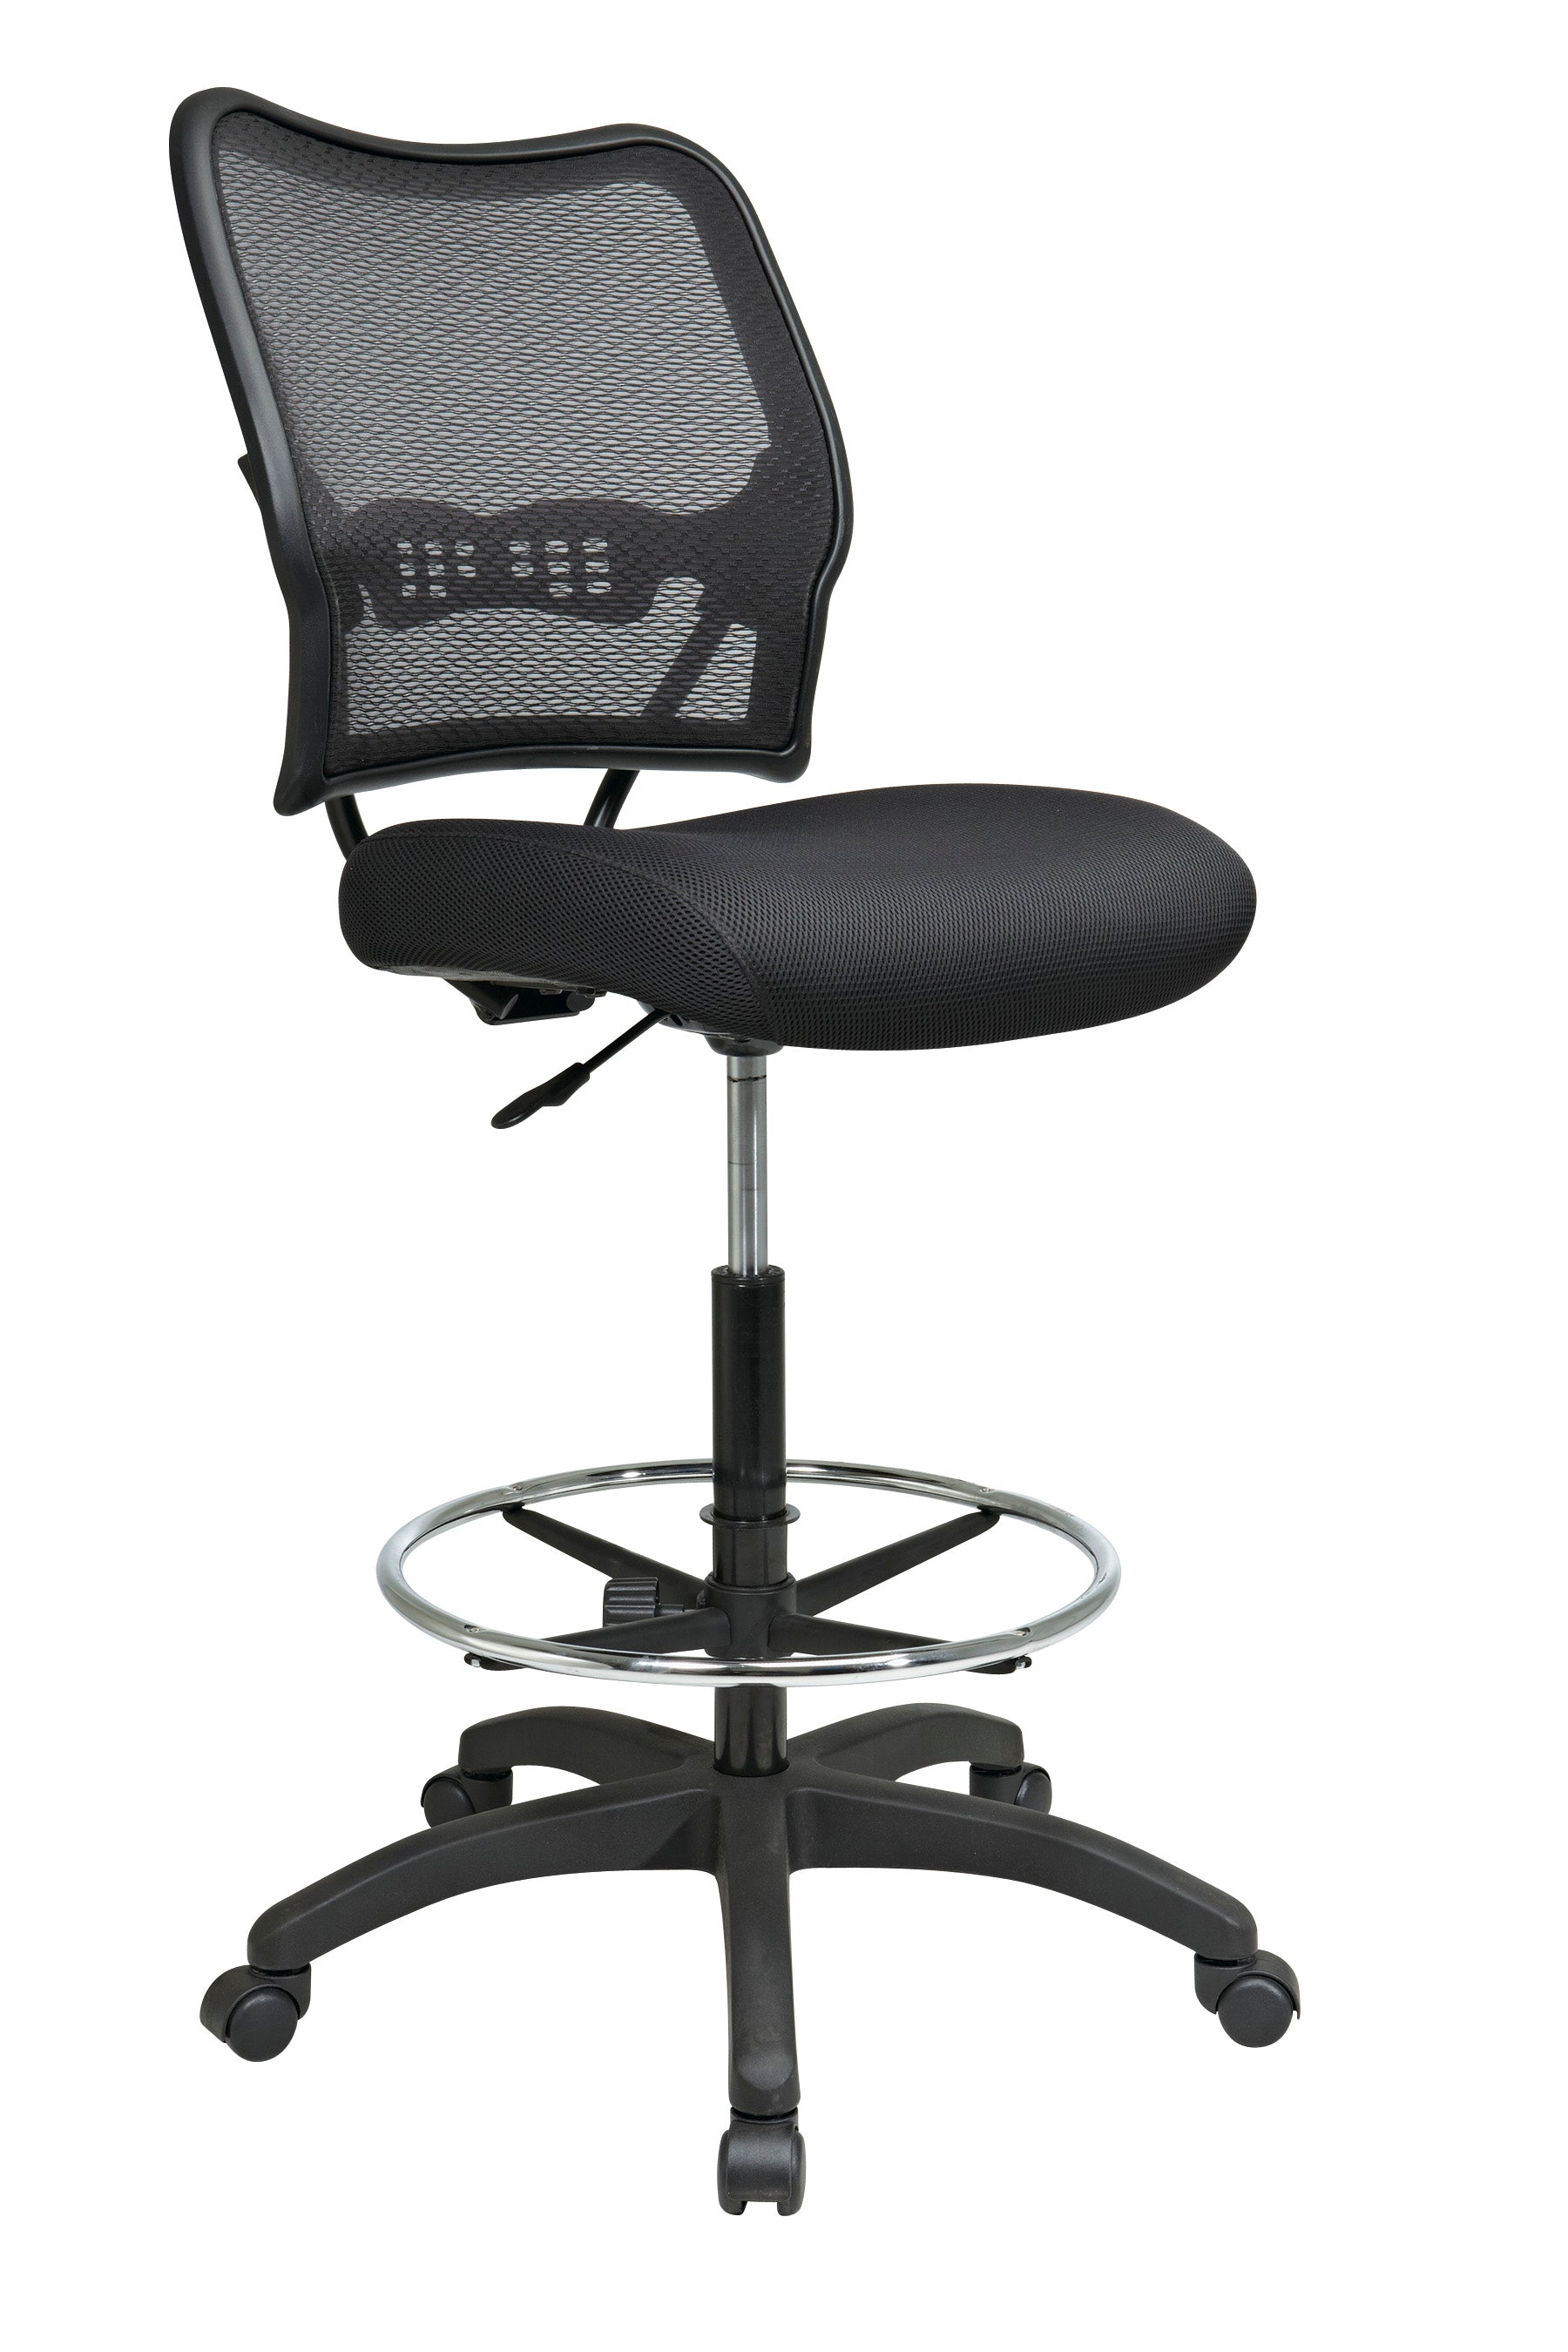 13-37N20D - Deluxe AirGrid Back Drafting Chair by Office Star